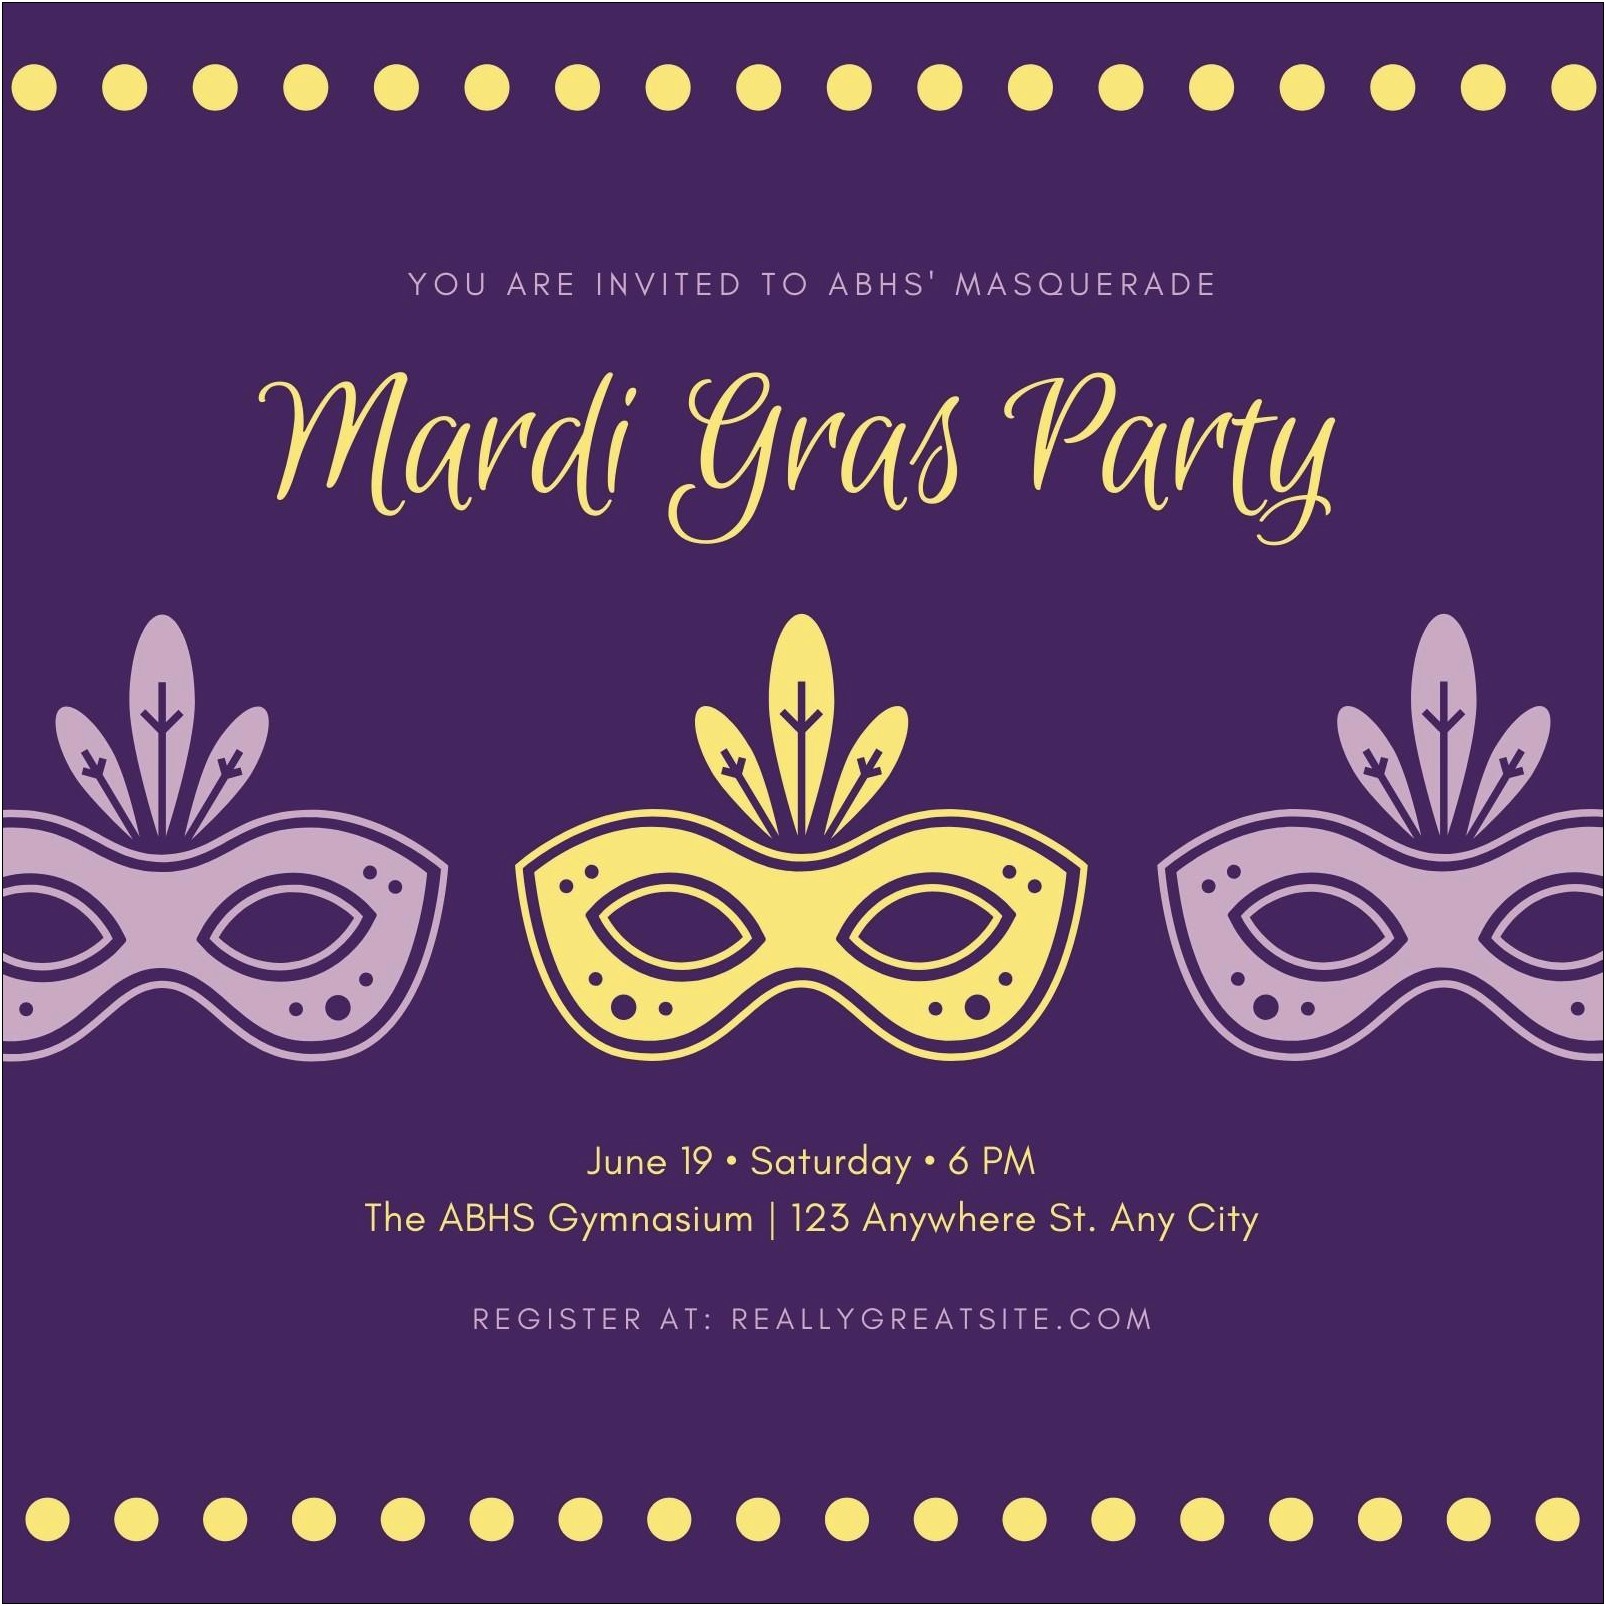 Powerpoint Party Invitation Mardi Gras Template Free